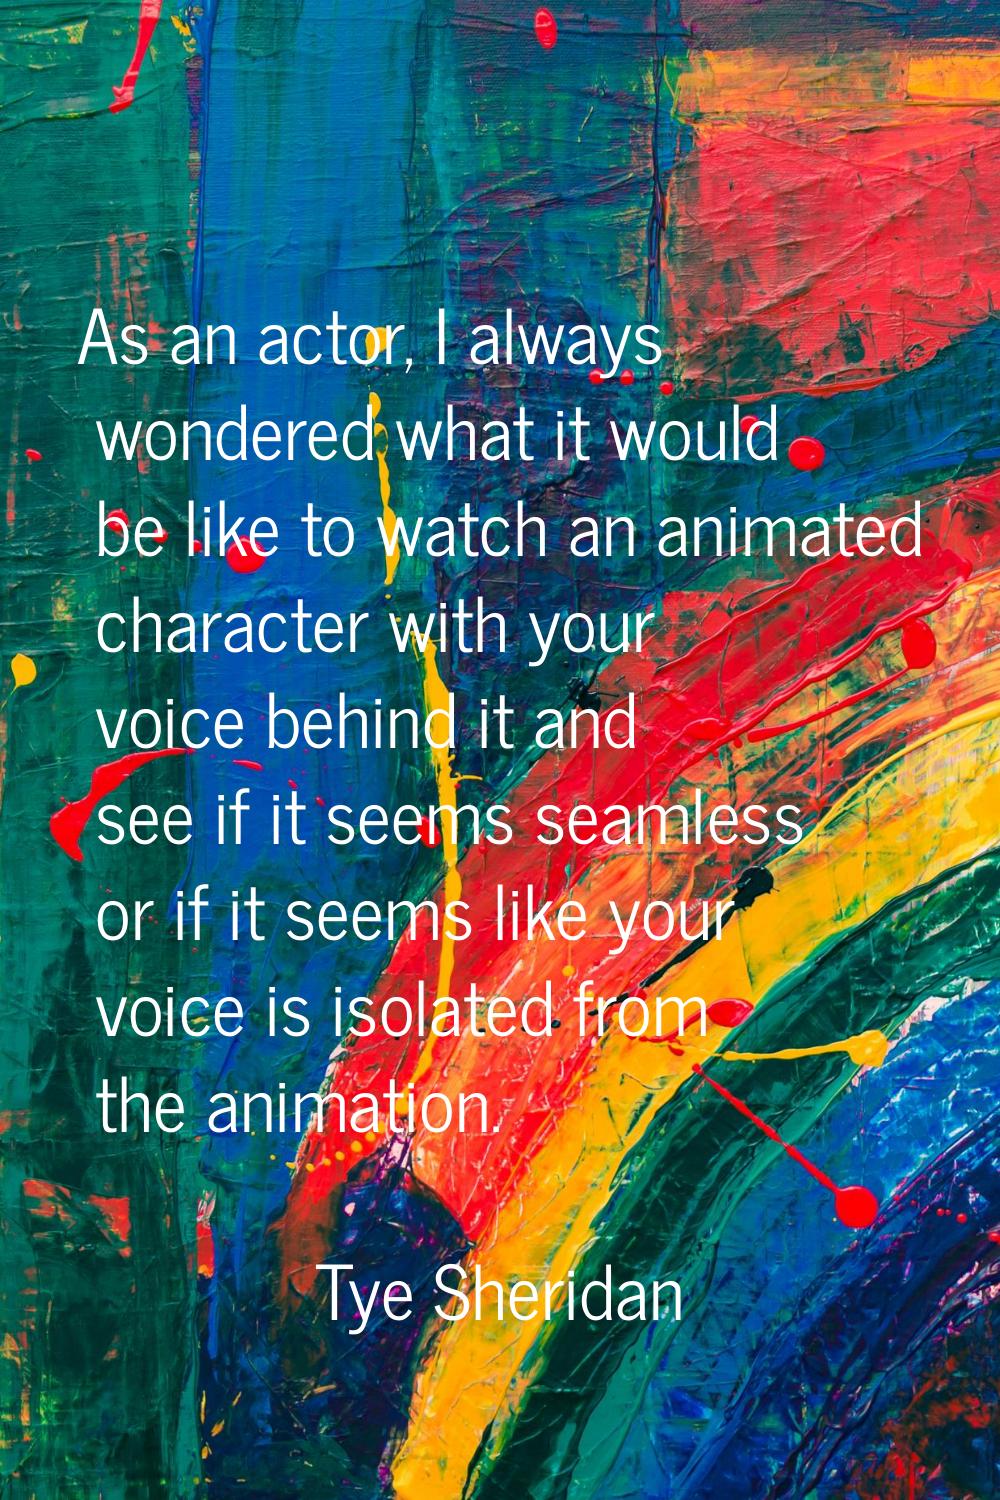 As an actor, I always wondered what it would be like to watch an animated character with your voice